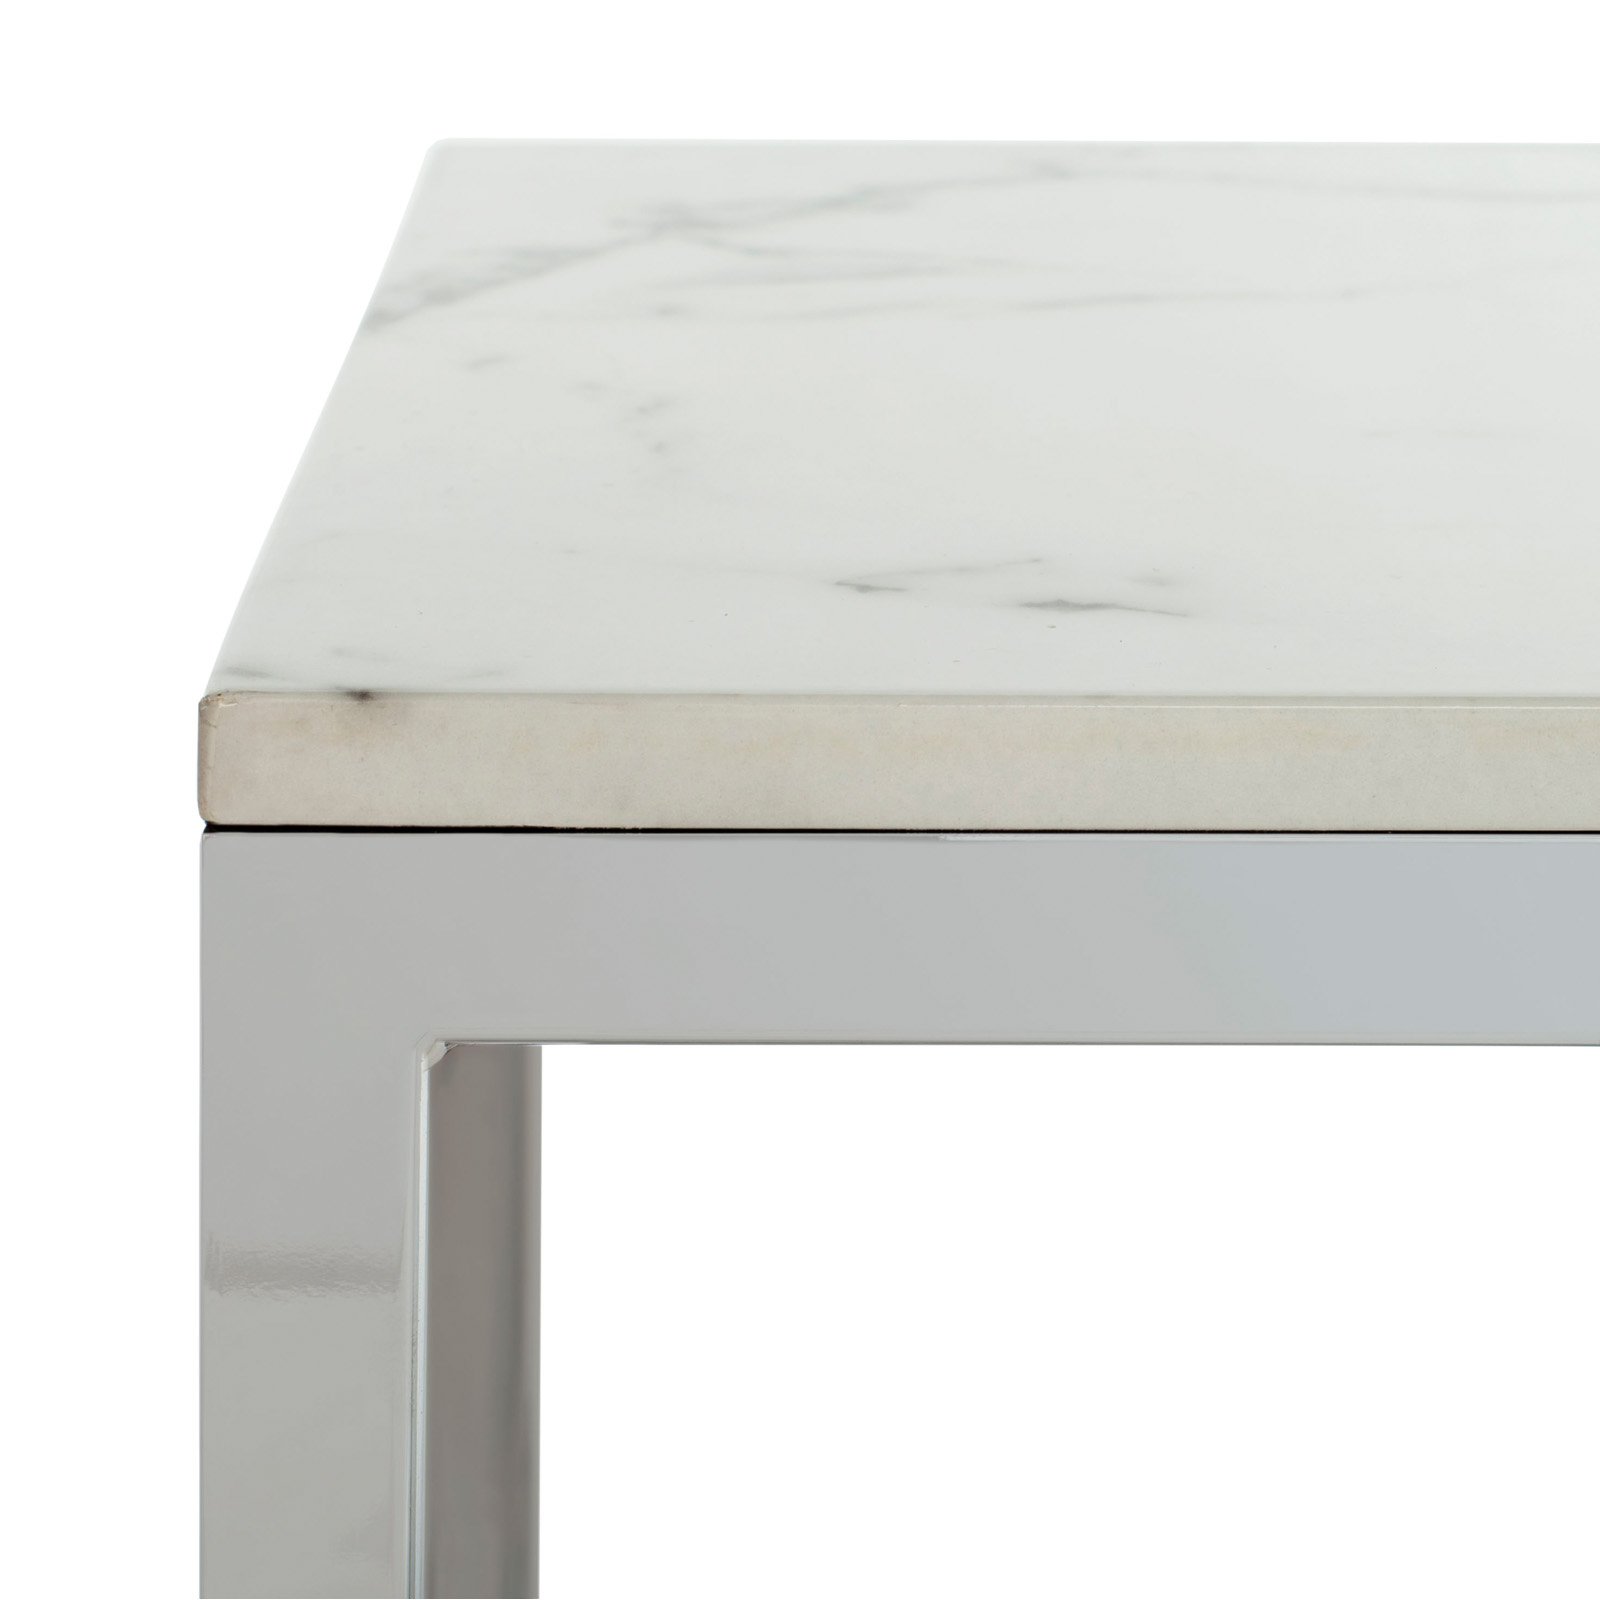 SAFAVIEH Bethany Square Modern Glam End Table, White Marble/Brass - image 4 of 11